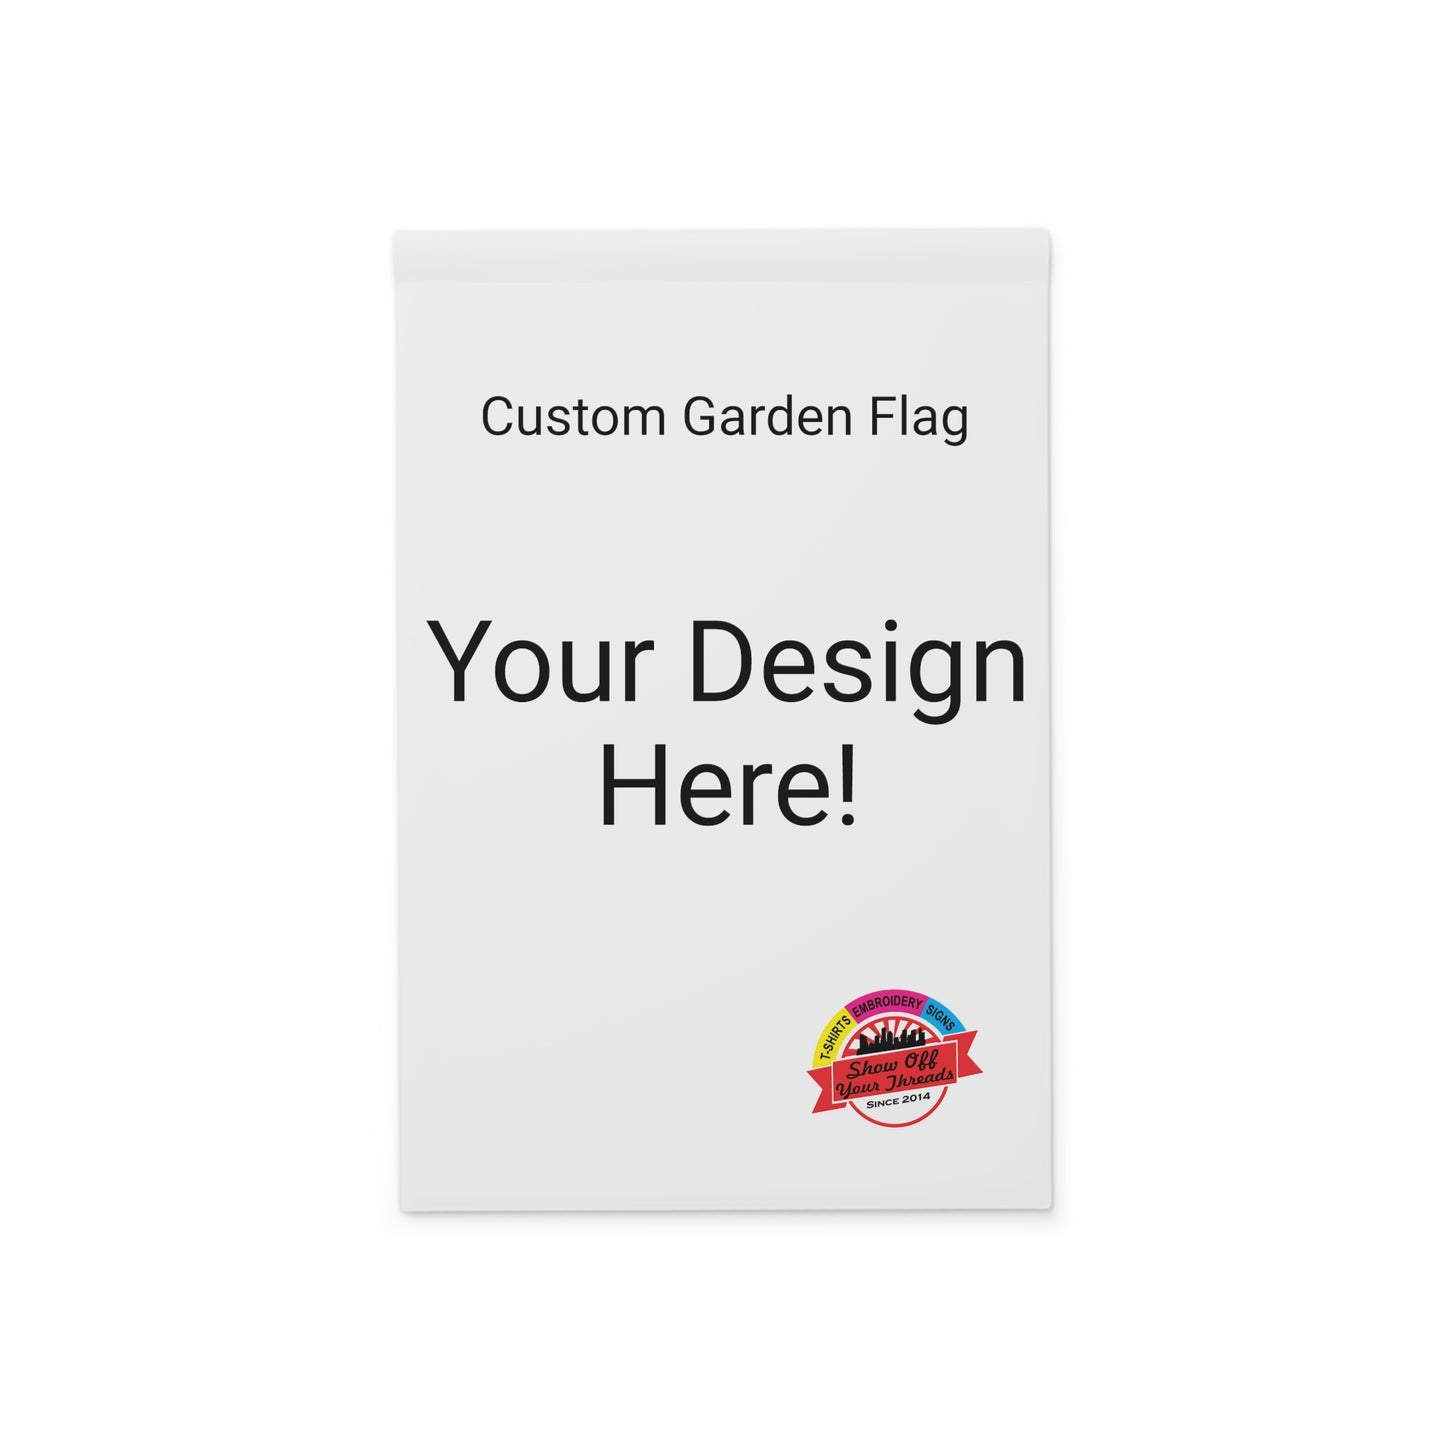 Custom Garden Flags - Personalize Your Outdoor Space